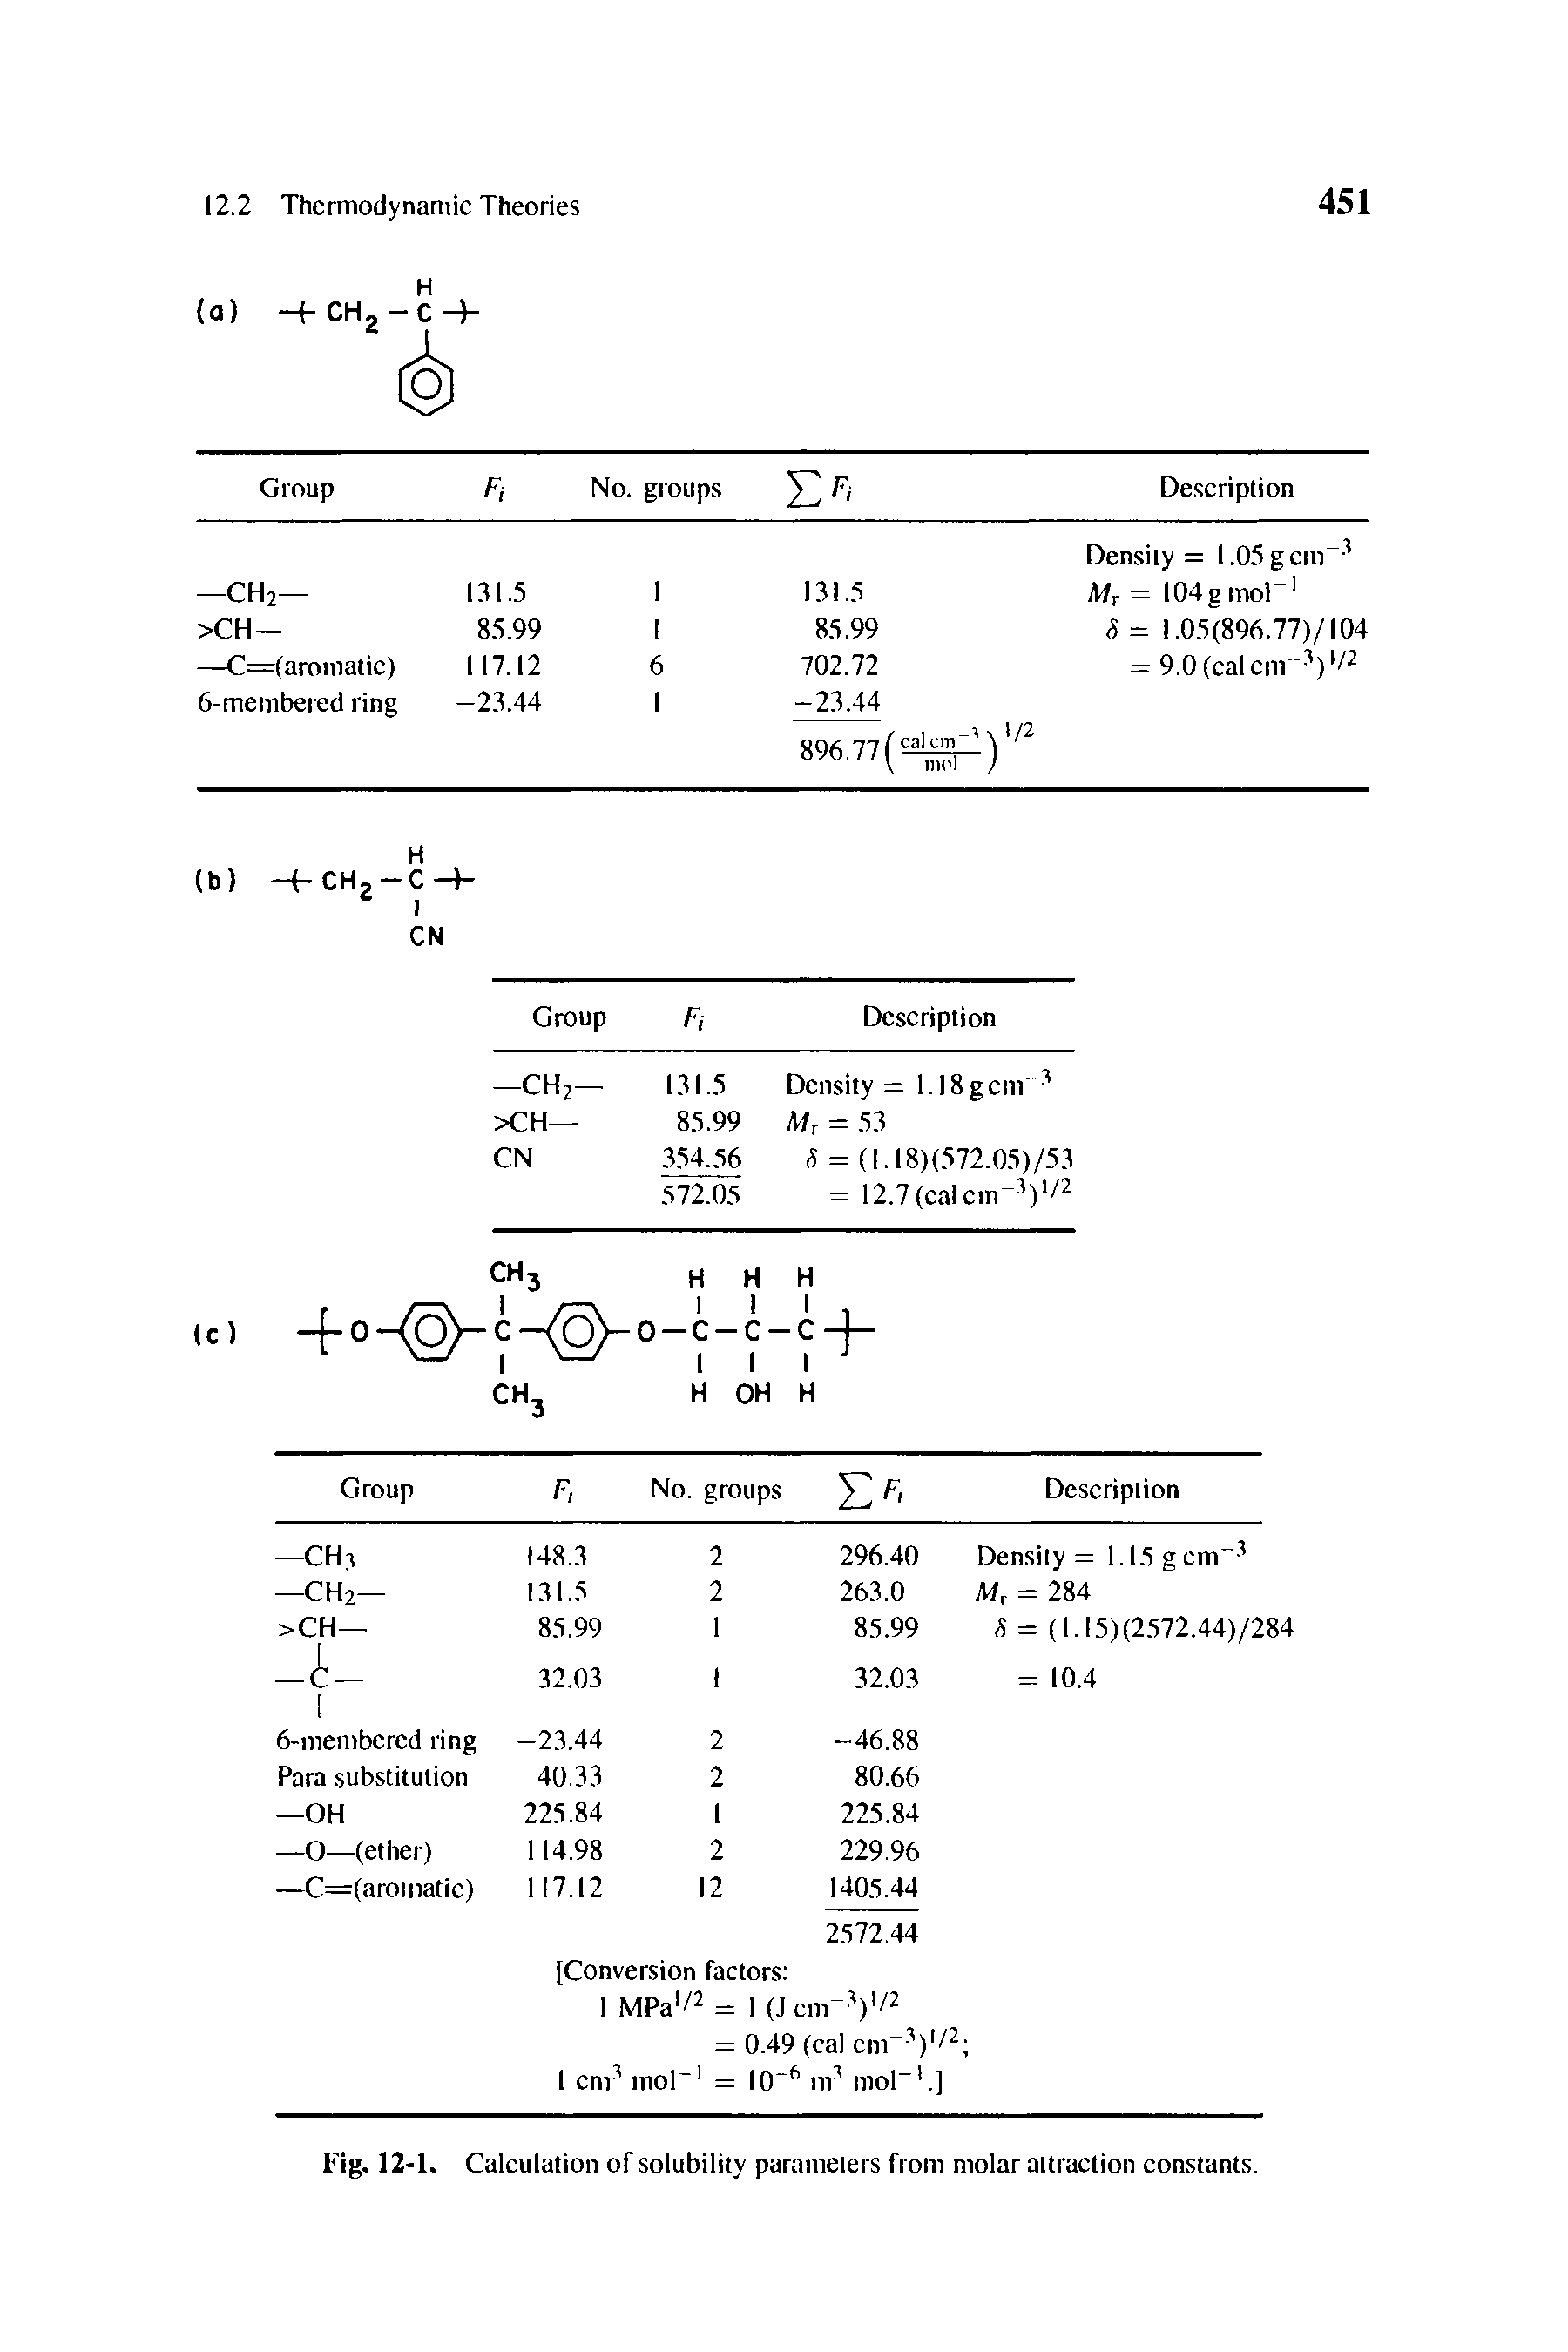 Fig. 12-1. Calculation of solubility parameters from molar attraction constants.